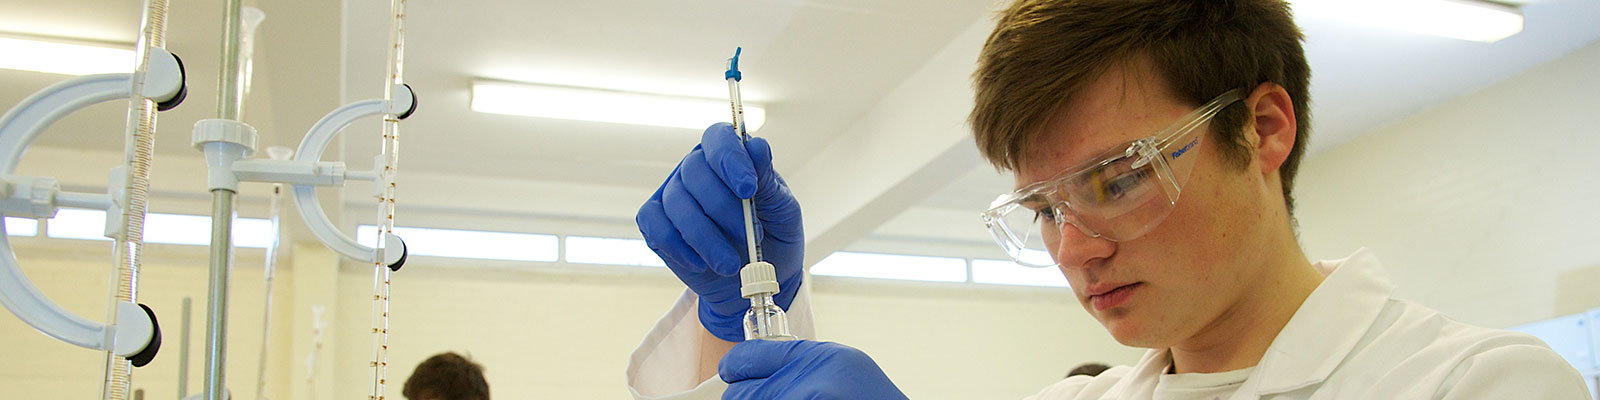 A student working in a laboratory